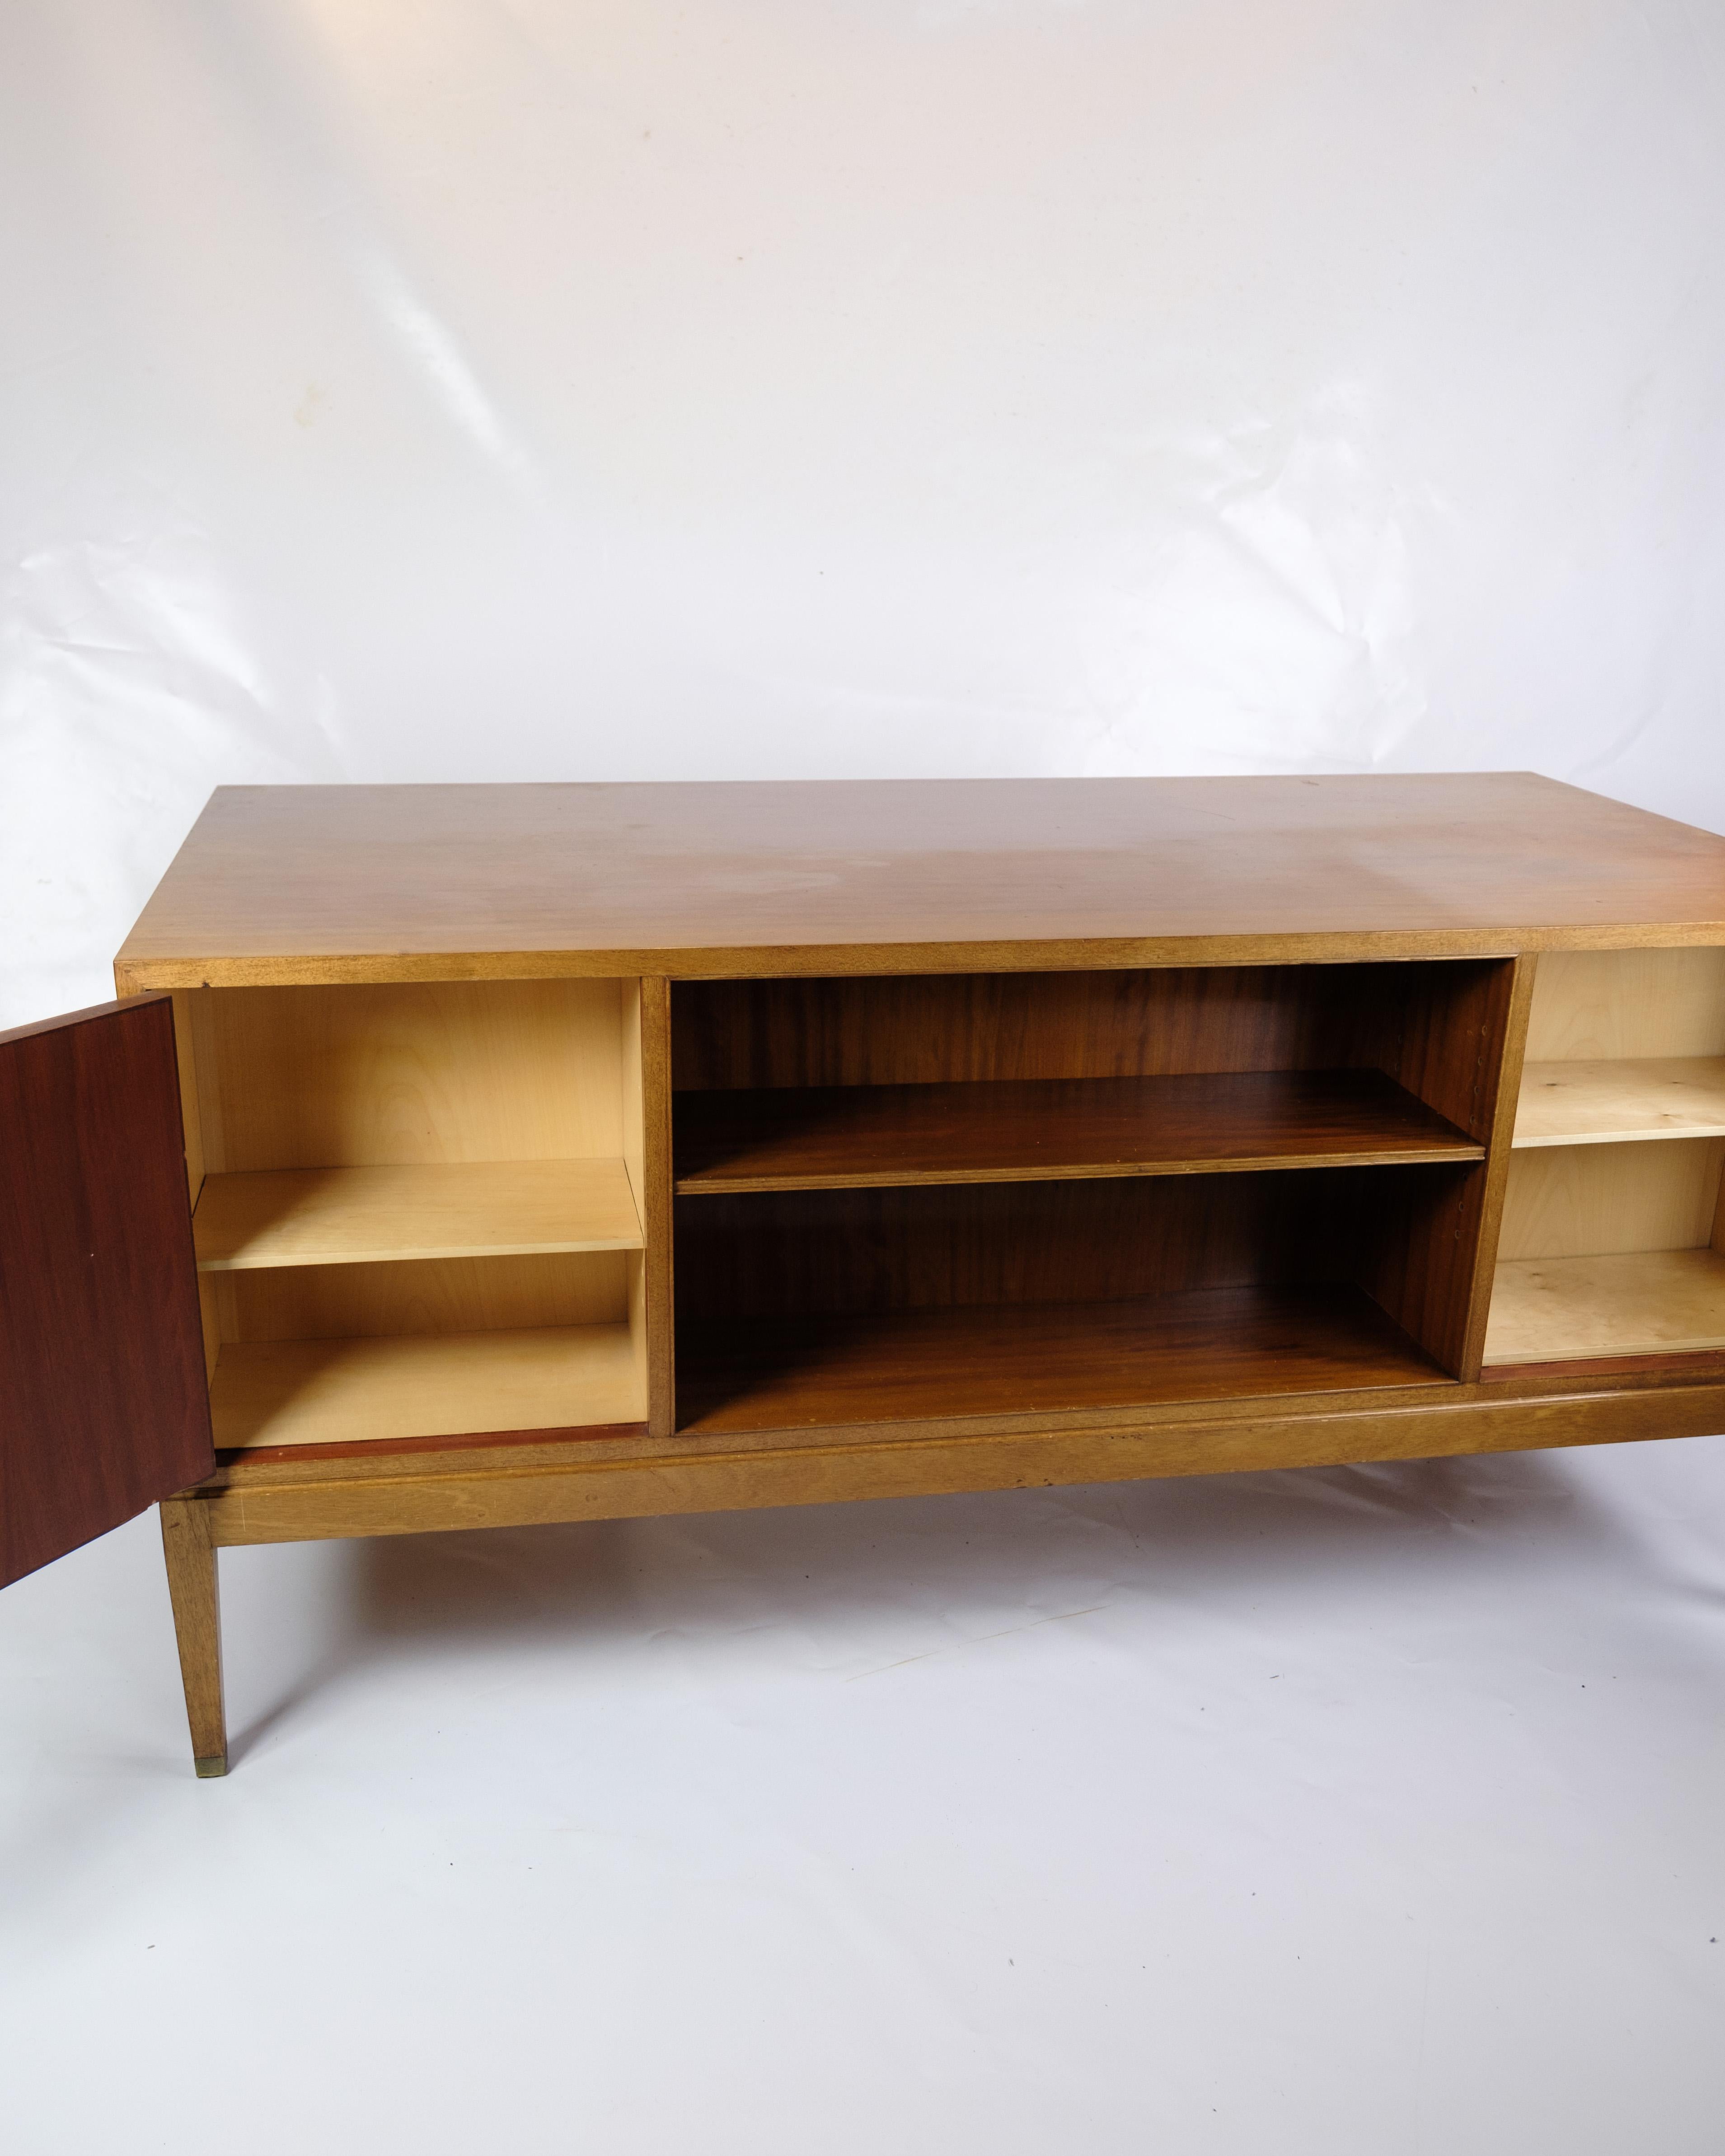 Freestanding Diplomat Desk Made In Mahogany By Fritz Henningsen From 1930s For Sale 5